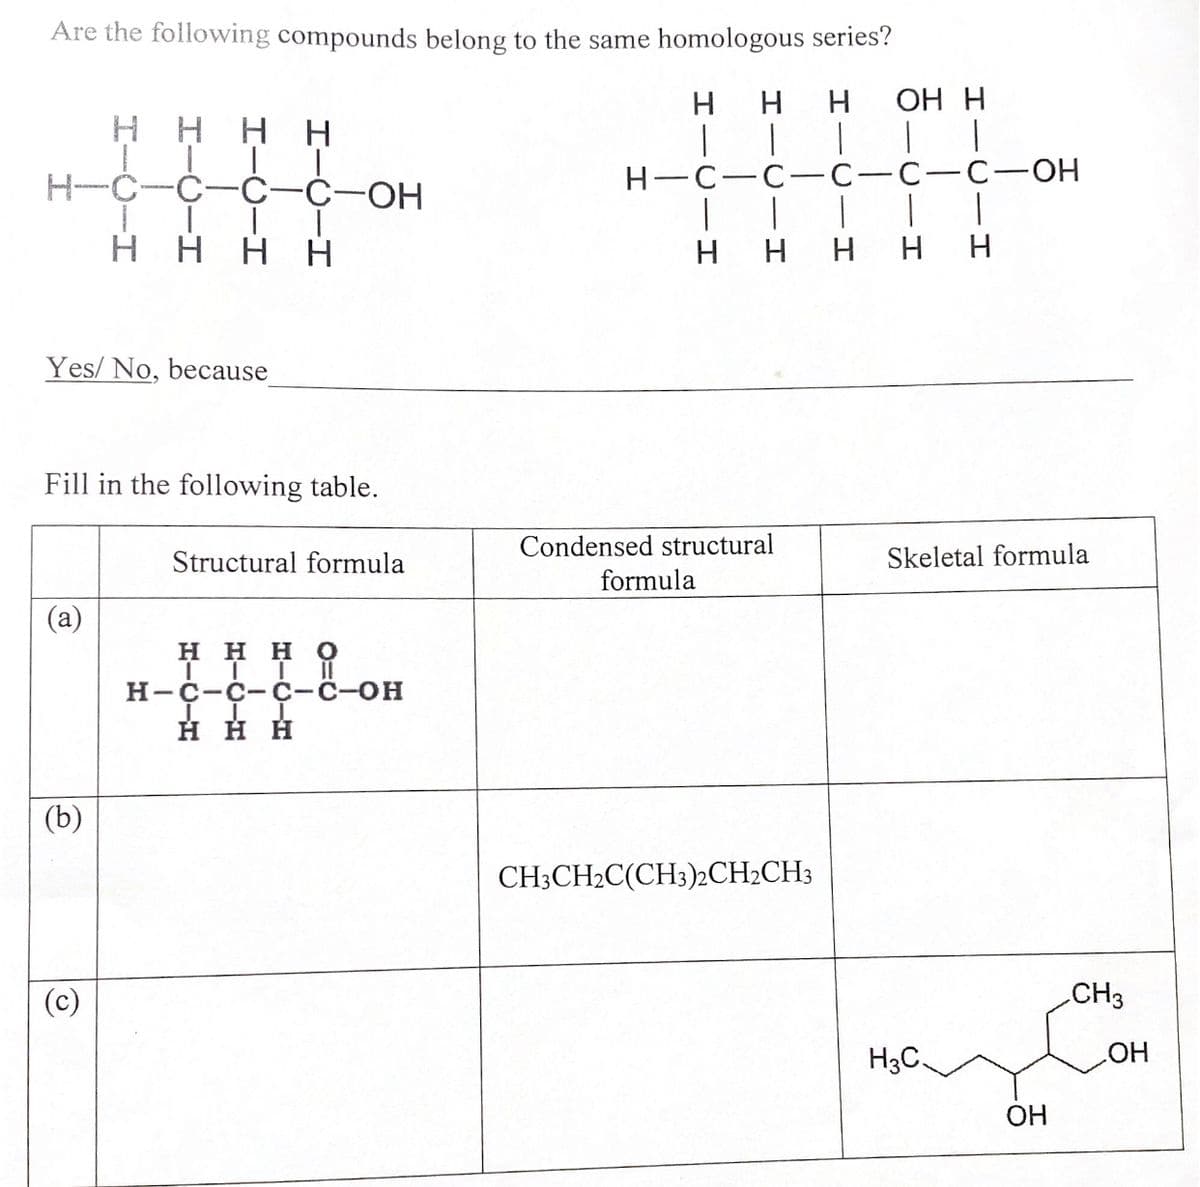 Are the following compounds belong to the same homologous series?
H H
H OH H
Η Η
T
|
|
-C-C-OH
H-C-C-C-C-C-OH
1
Η Η Η Η
H
H H
H H
Condensed structural
formula
Skeletal formula
CH3CH2C(CH3)2CH₂CH3
Yes/No, because
Fill in the following table.
Structural formula
(a)
Η Η Η Ο
III
H-C-C-C-C-OH
i-OH
III
H H H
(b)
H3C.
OH
CH3
OH